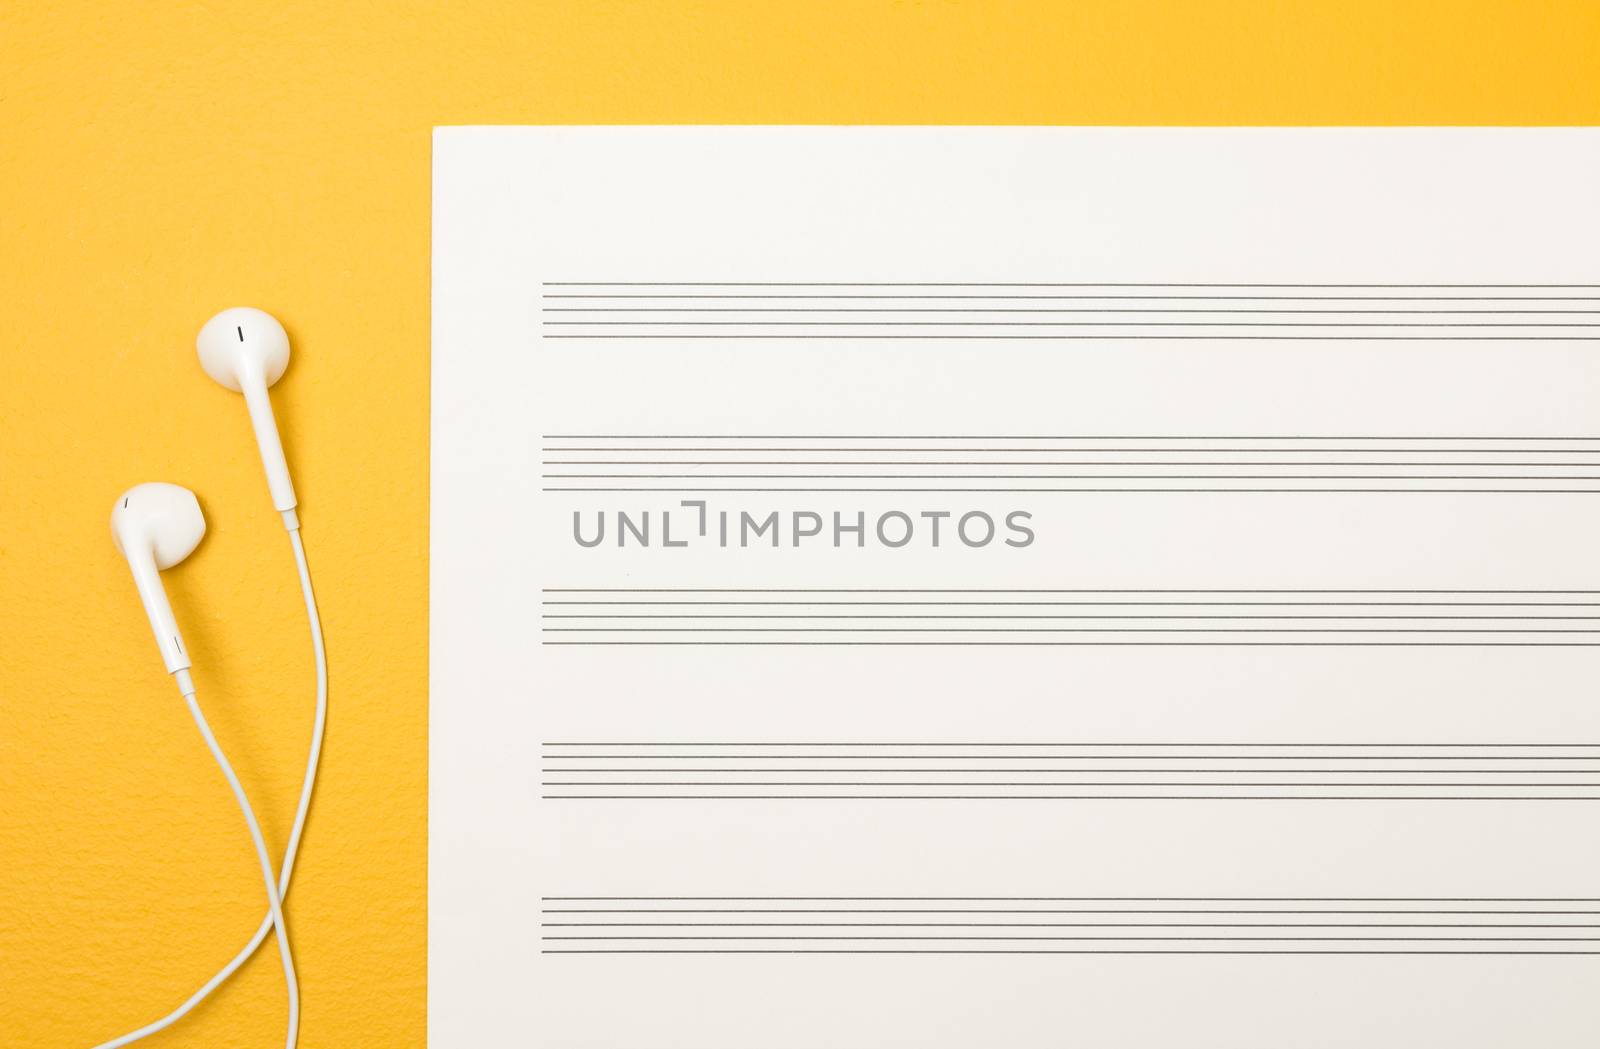 Earphones and blank music sheet on yellow background by anikasalsera